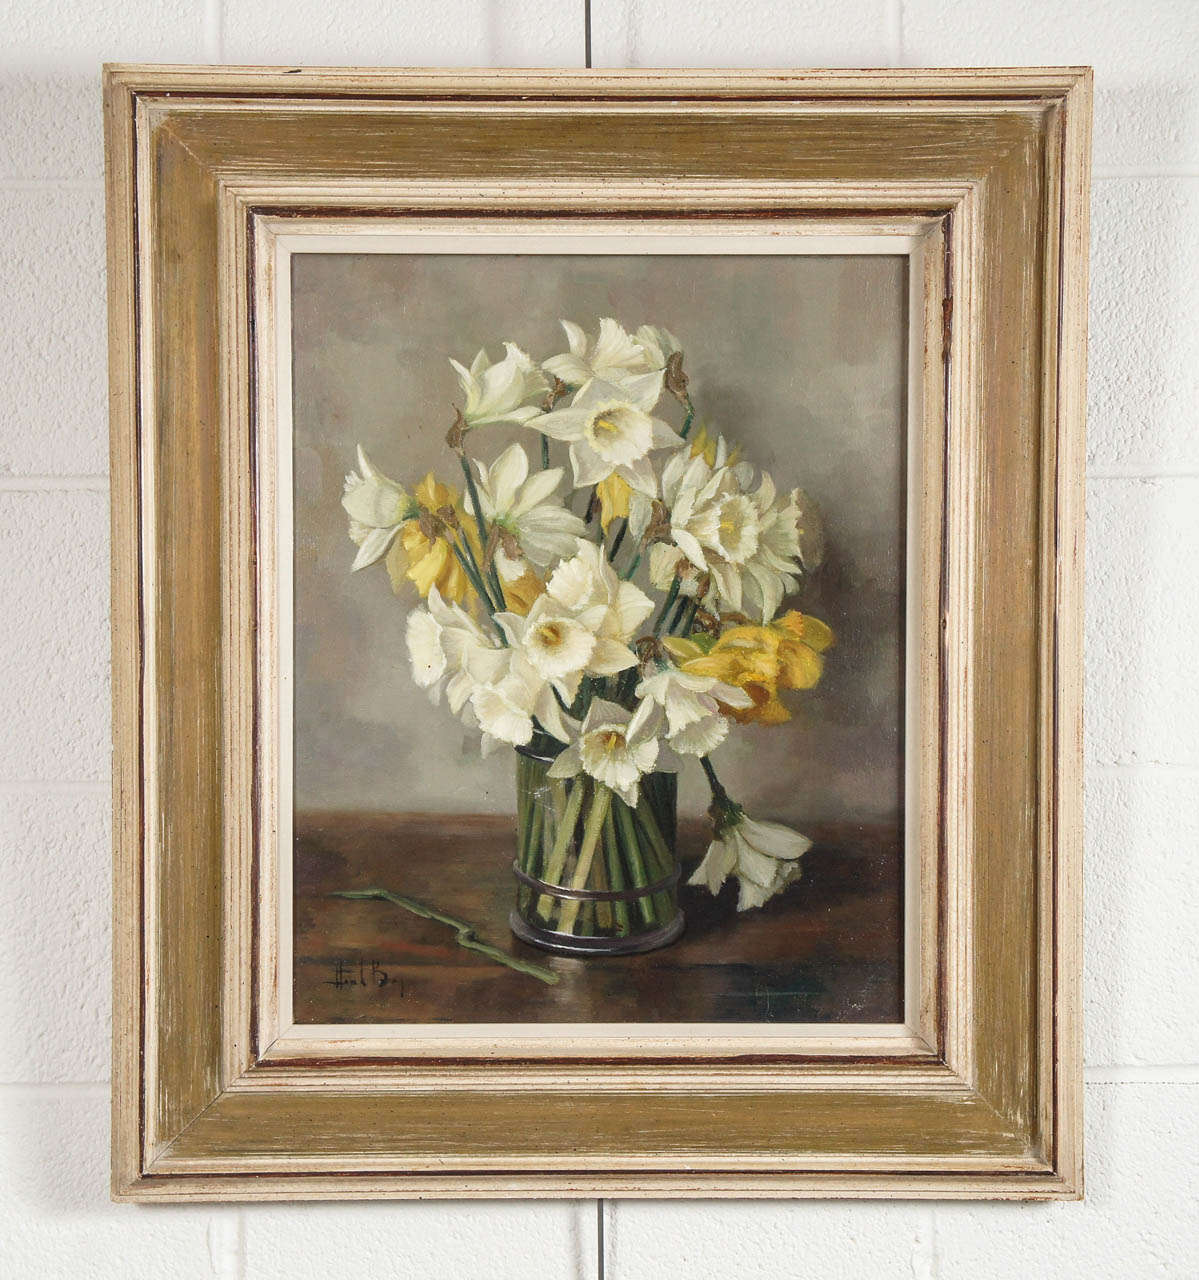 Here is a beautiful still life painting of a bouquet of daffodils in a vintage frame.